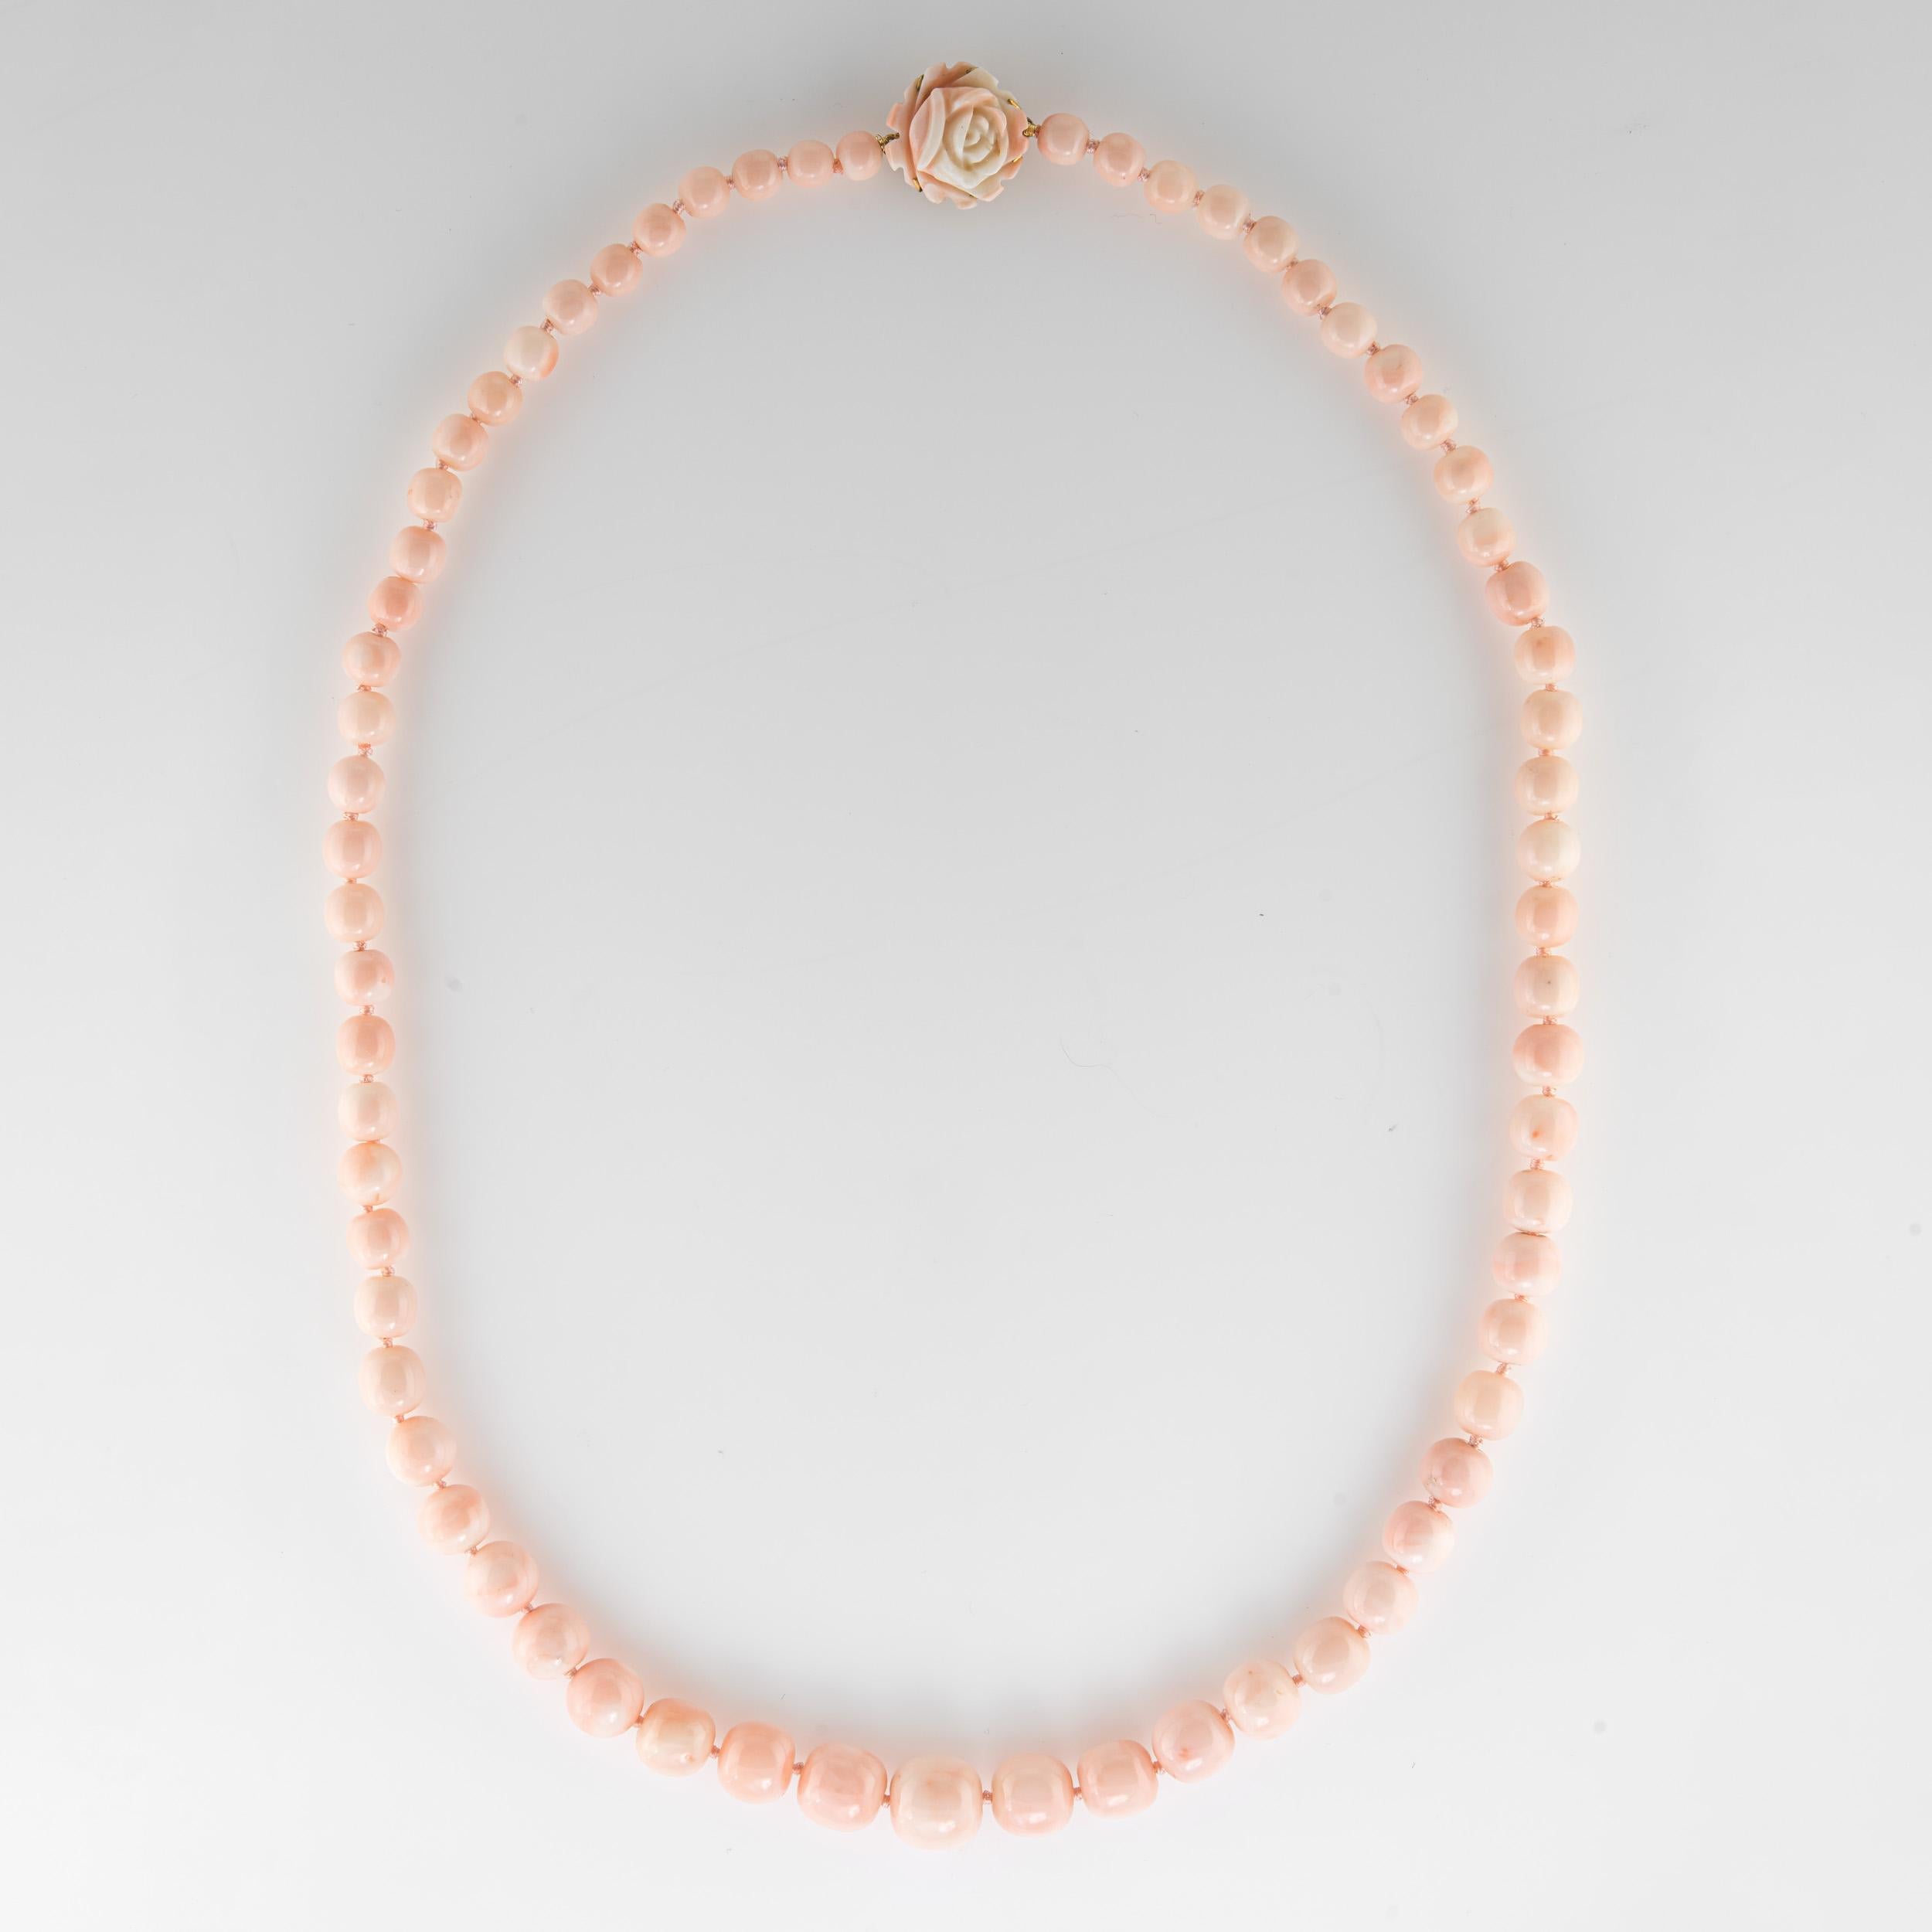 Finely detailed vintage angel skin coral necklace finished with a yellow gold plated floral clasp (circa 1950s to 1960s). 

The coral beads graduate in size from 6.5mm to 12.5mm. The beads are in excellent condition and free of cracks or chips. The